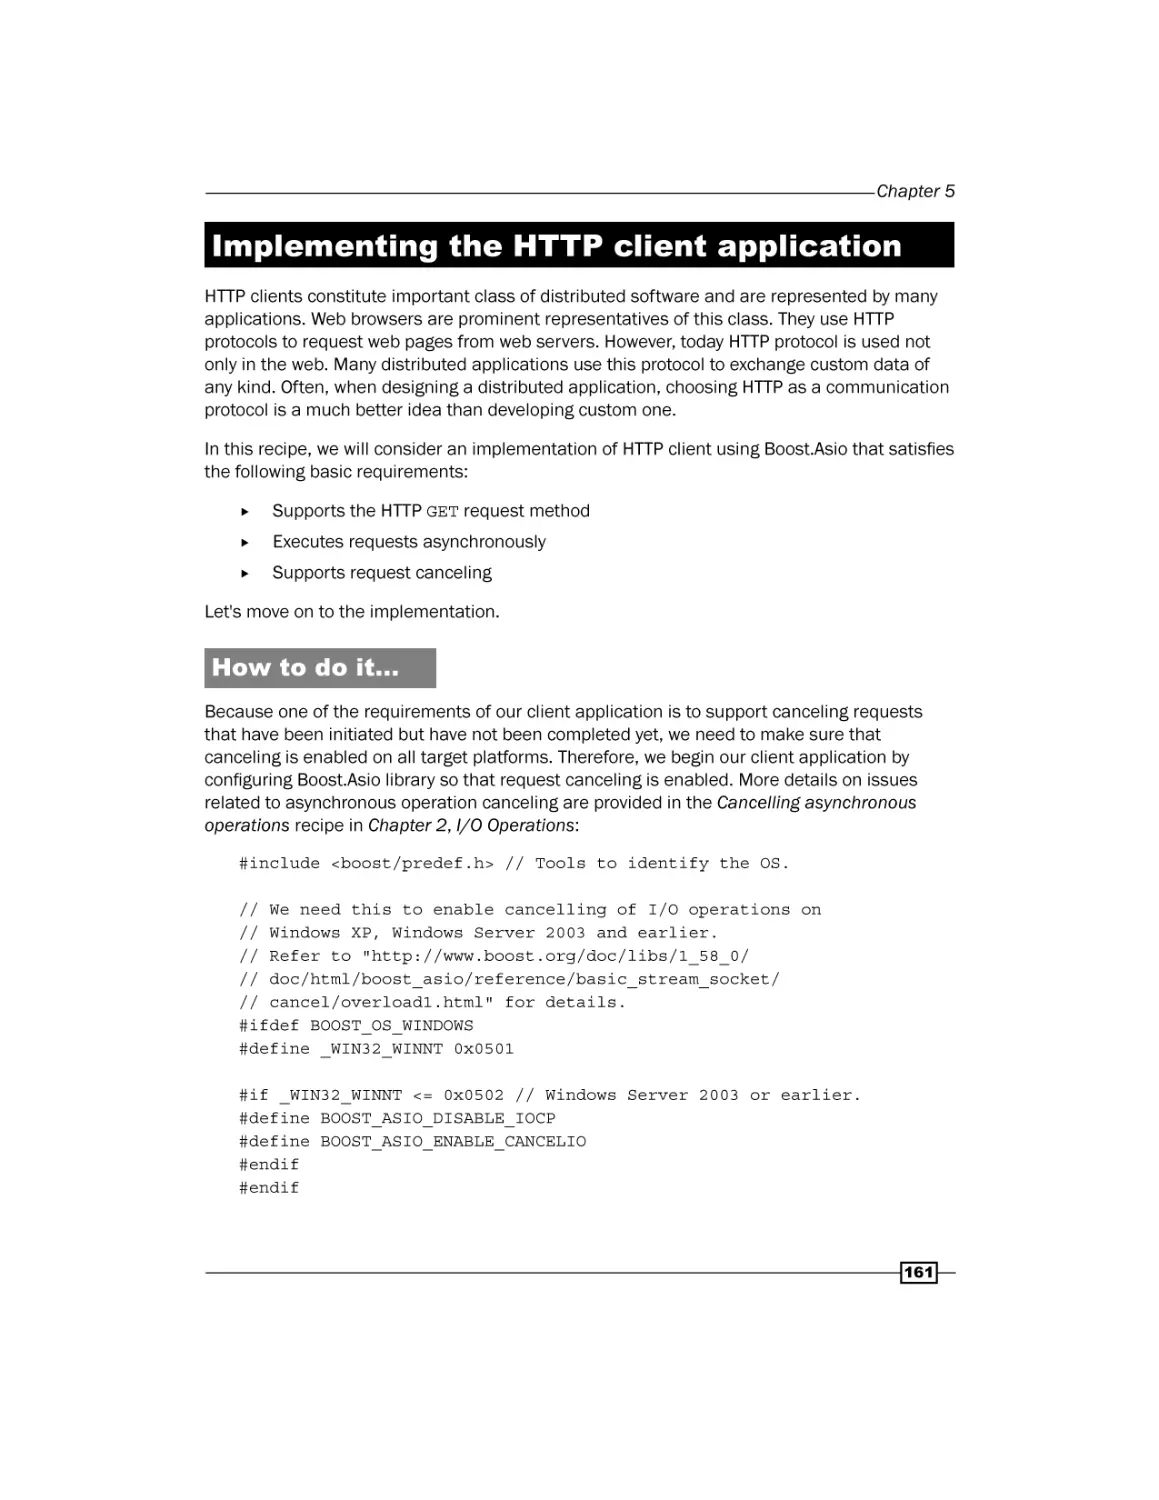 Implementing the HTTP client application